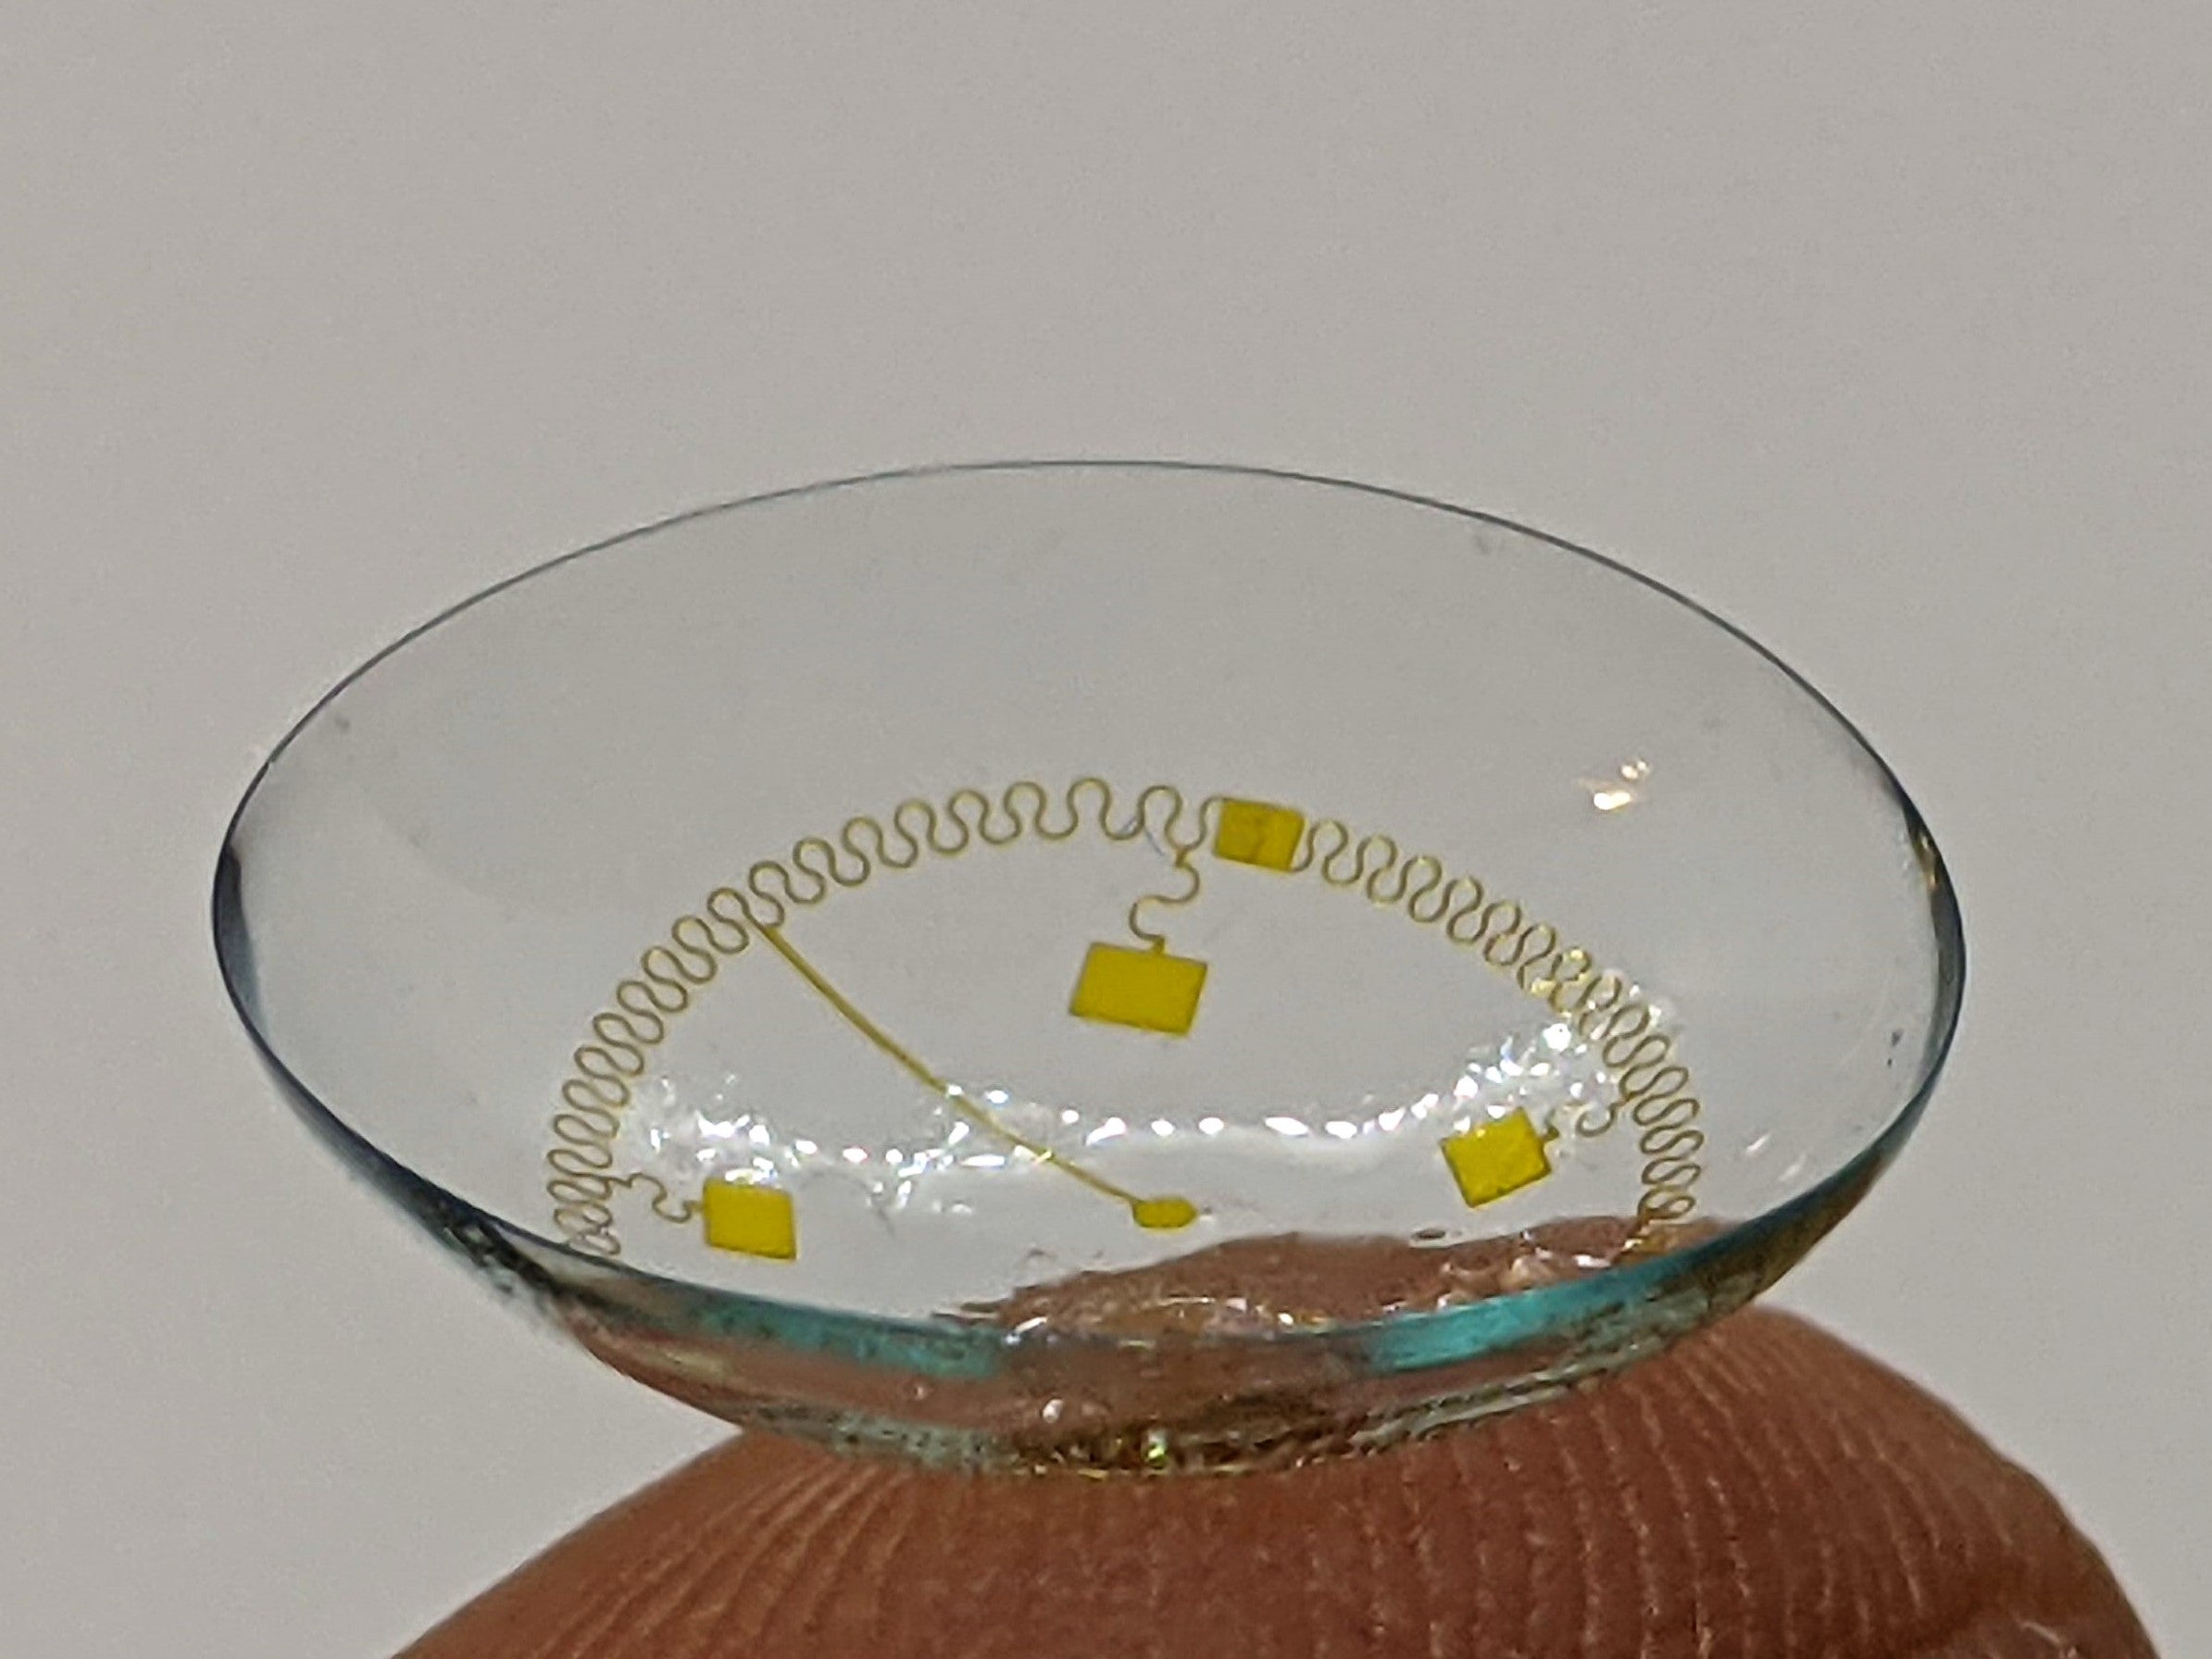 InWith’s smart contact lens, which it claims can deliver real-time info directly to your eyes, was on display at the CES technology conference in Las Vegas, 10 January, 2022